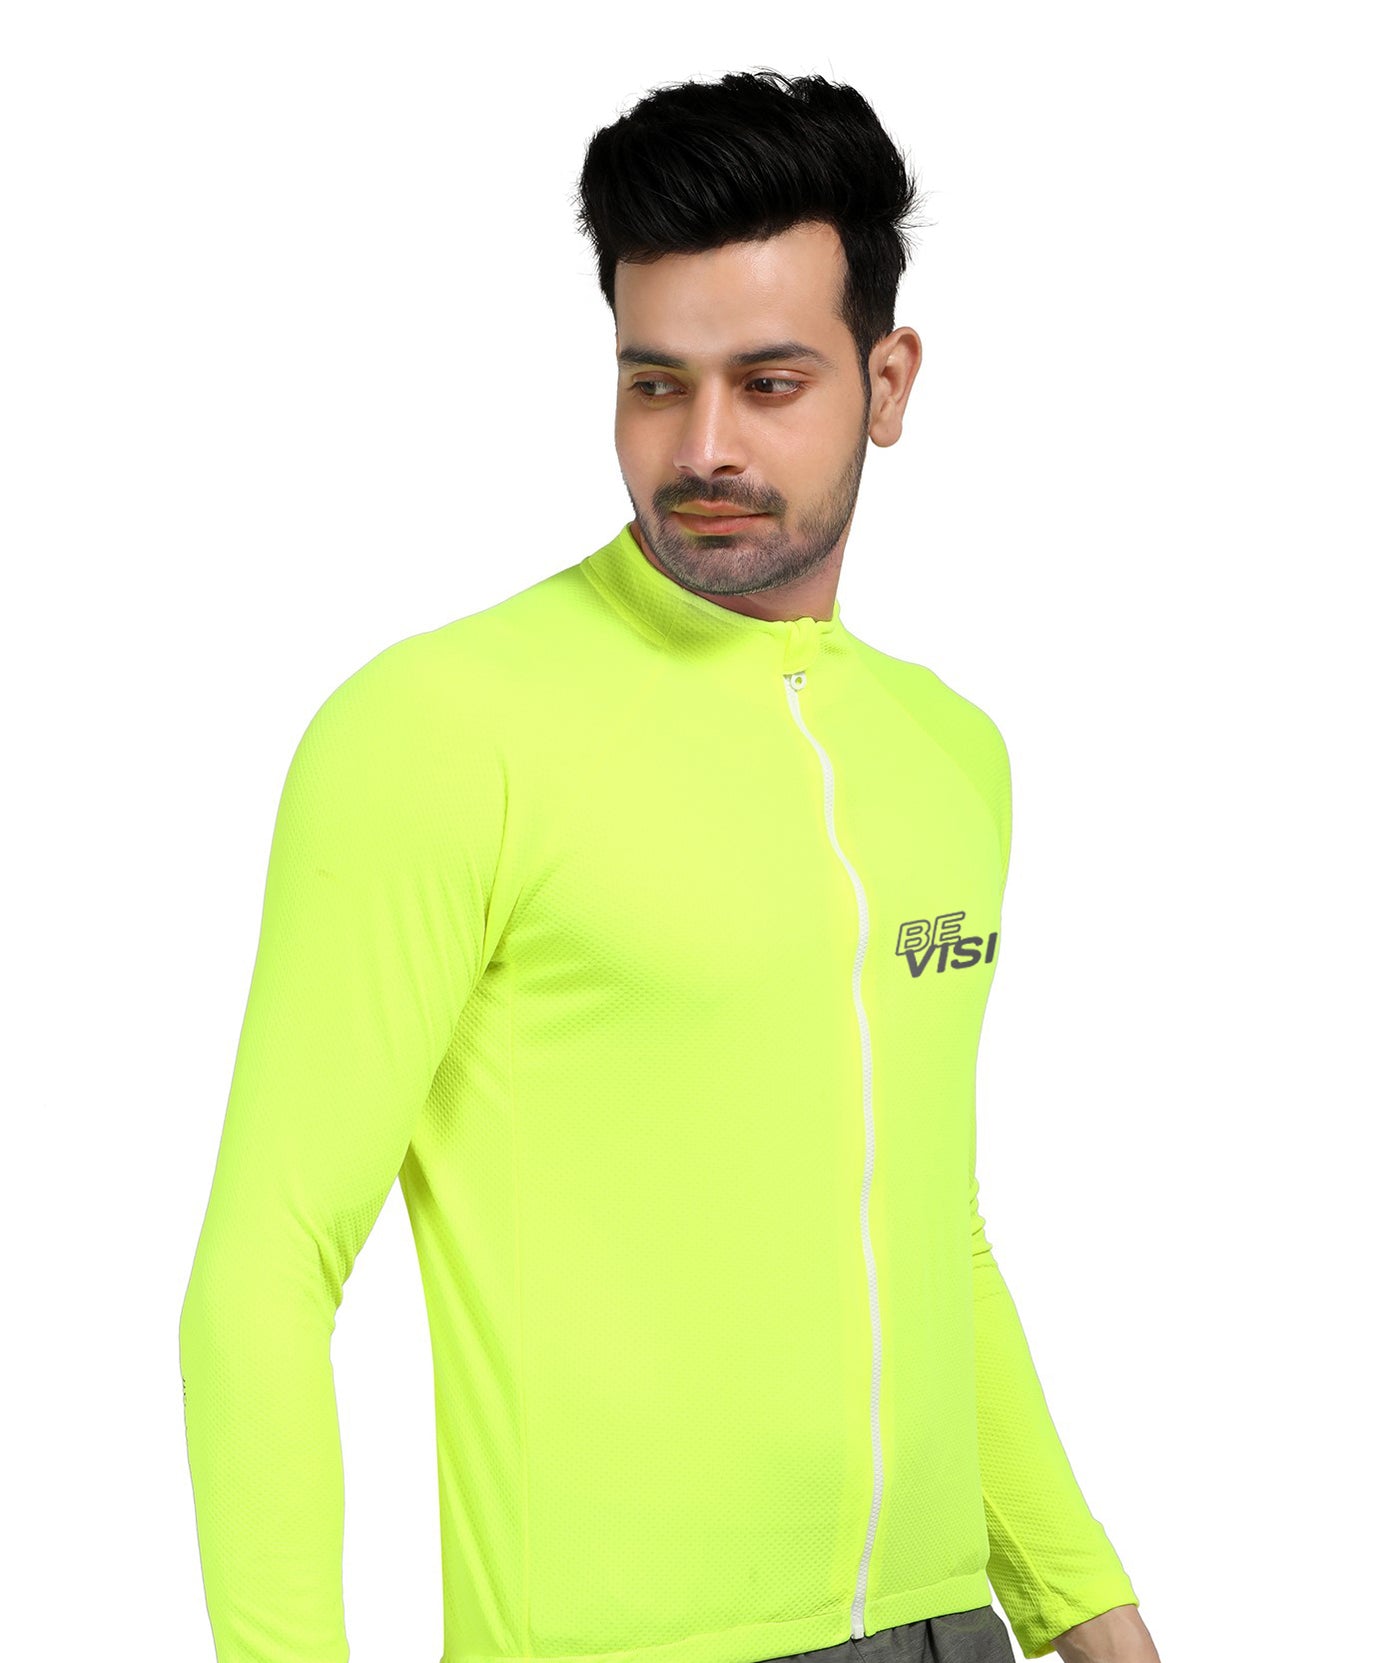 Triquip BeVisible Men Cycling Jersey Full Sleeves - Neon Green - Cyclop.in